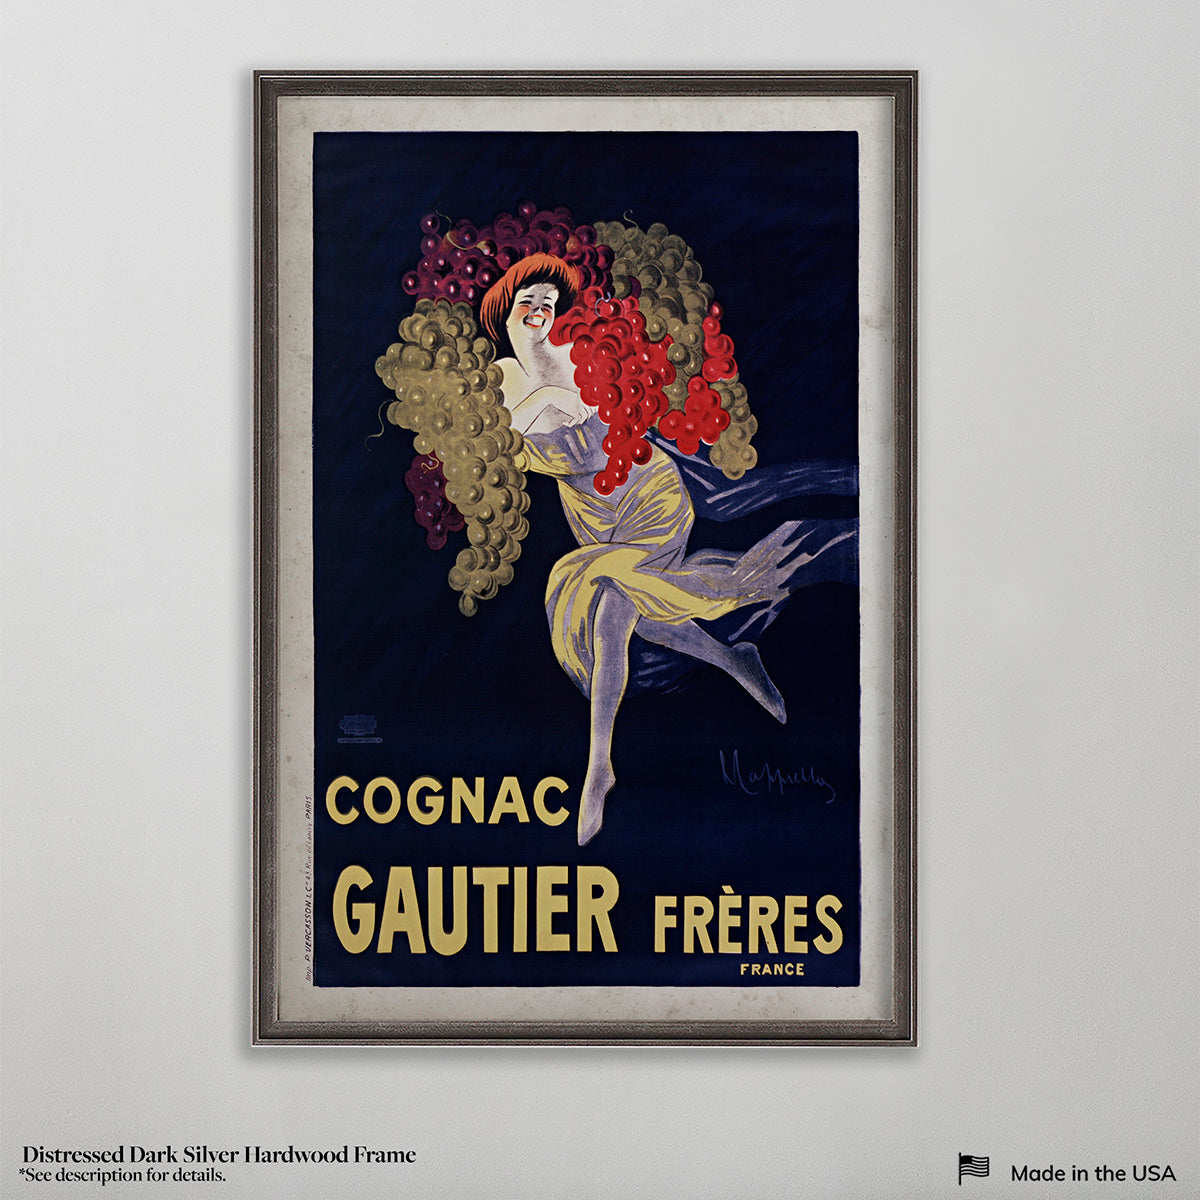 Cognac Gautier Frères vintage wall art poster on white wall with vintage furniture and vintage decor.